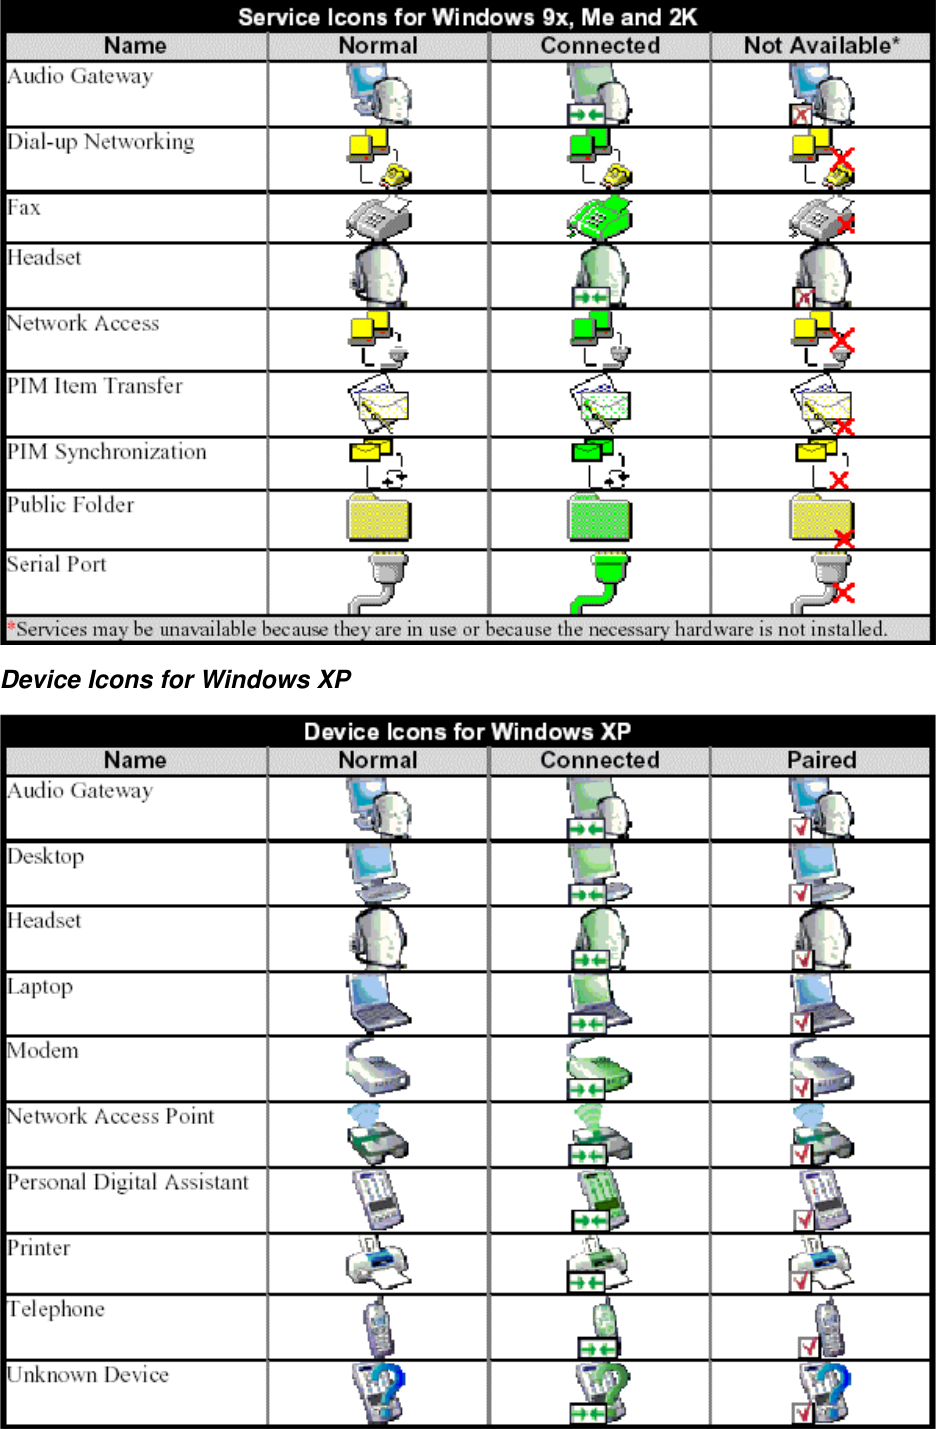  Device Icons for Windows XP  